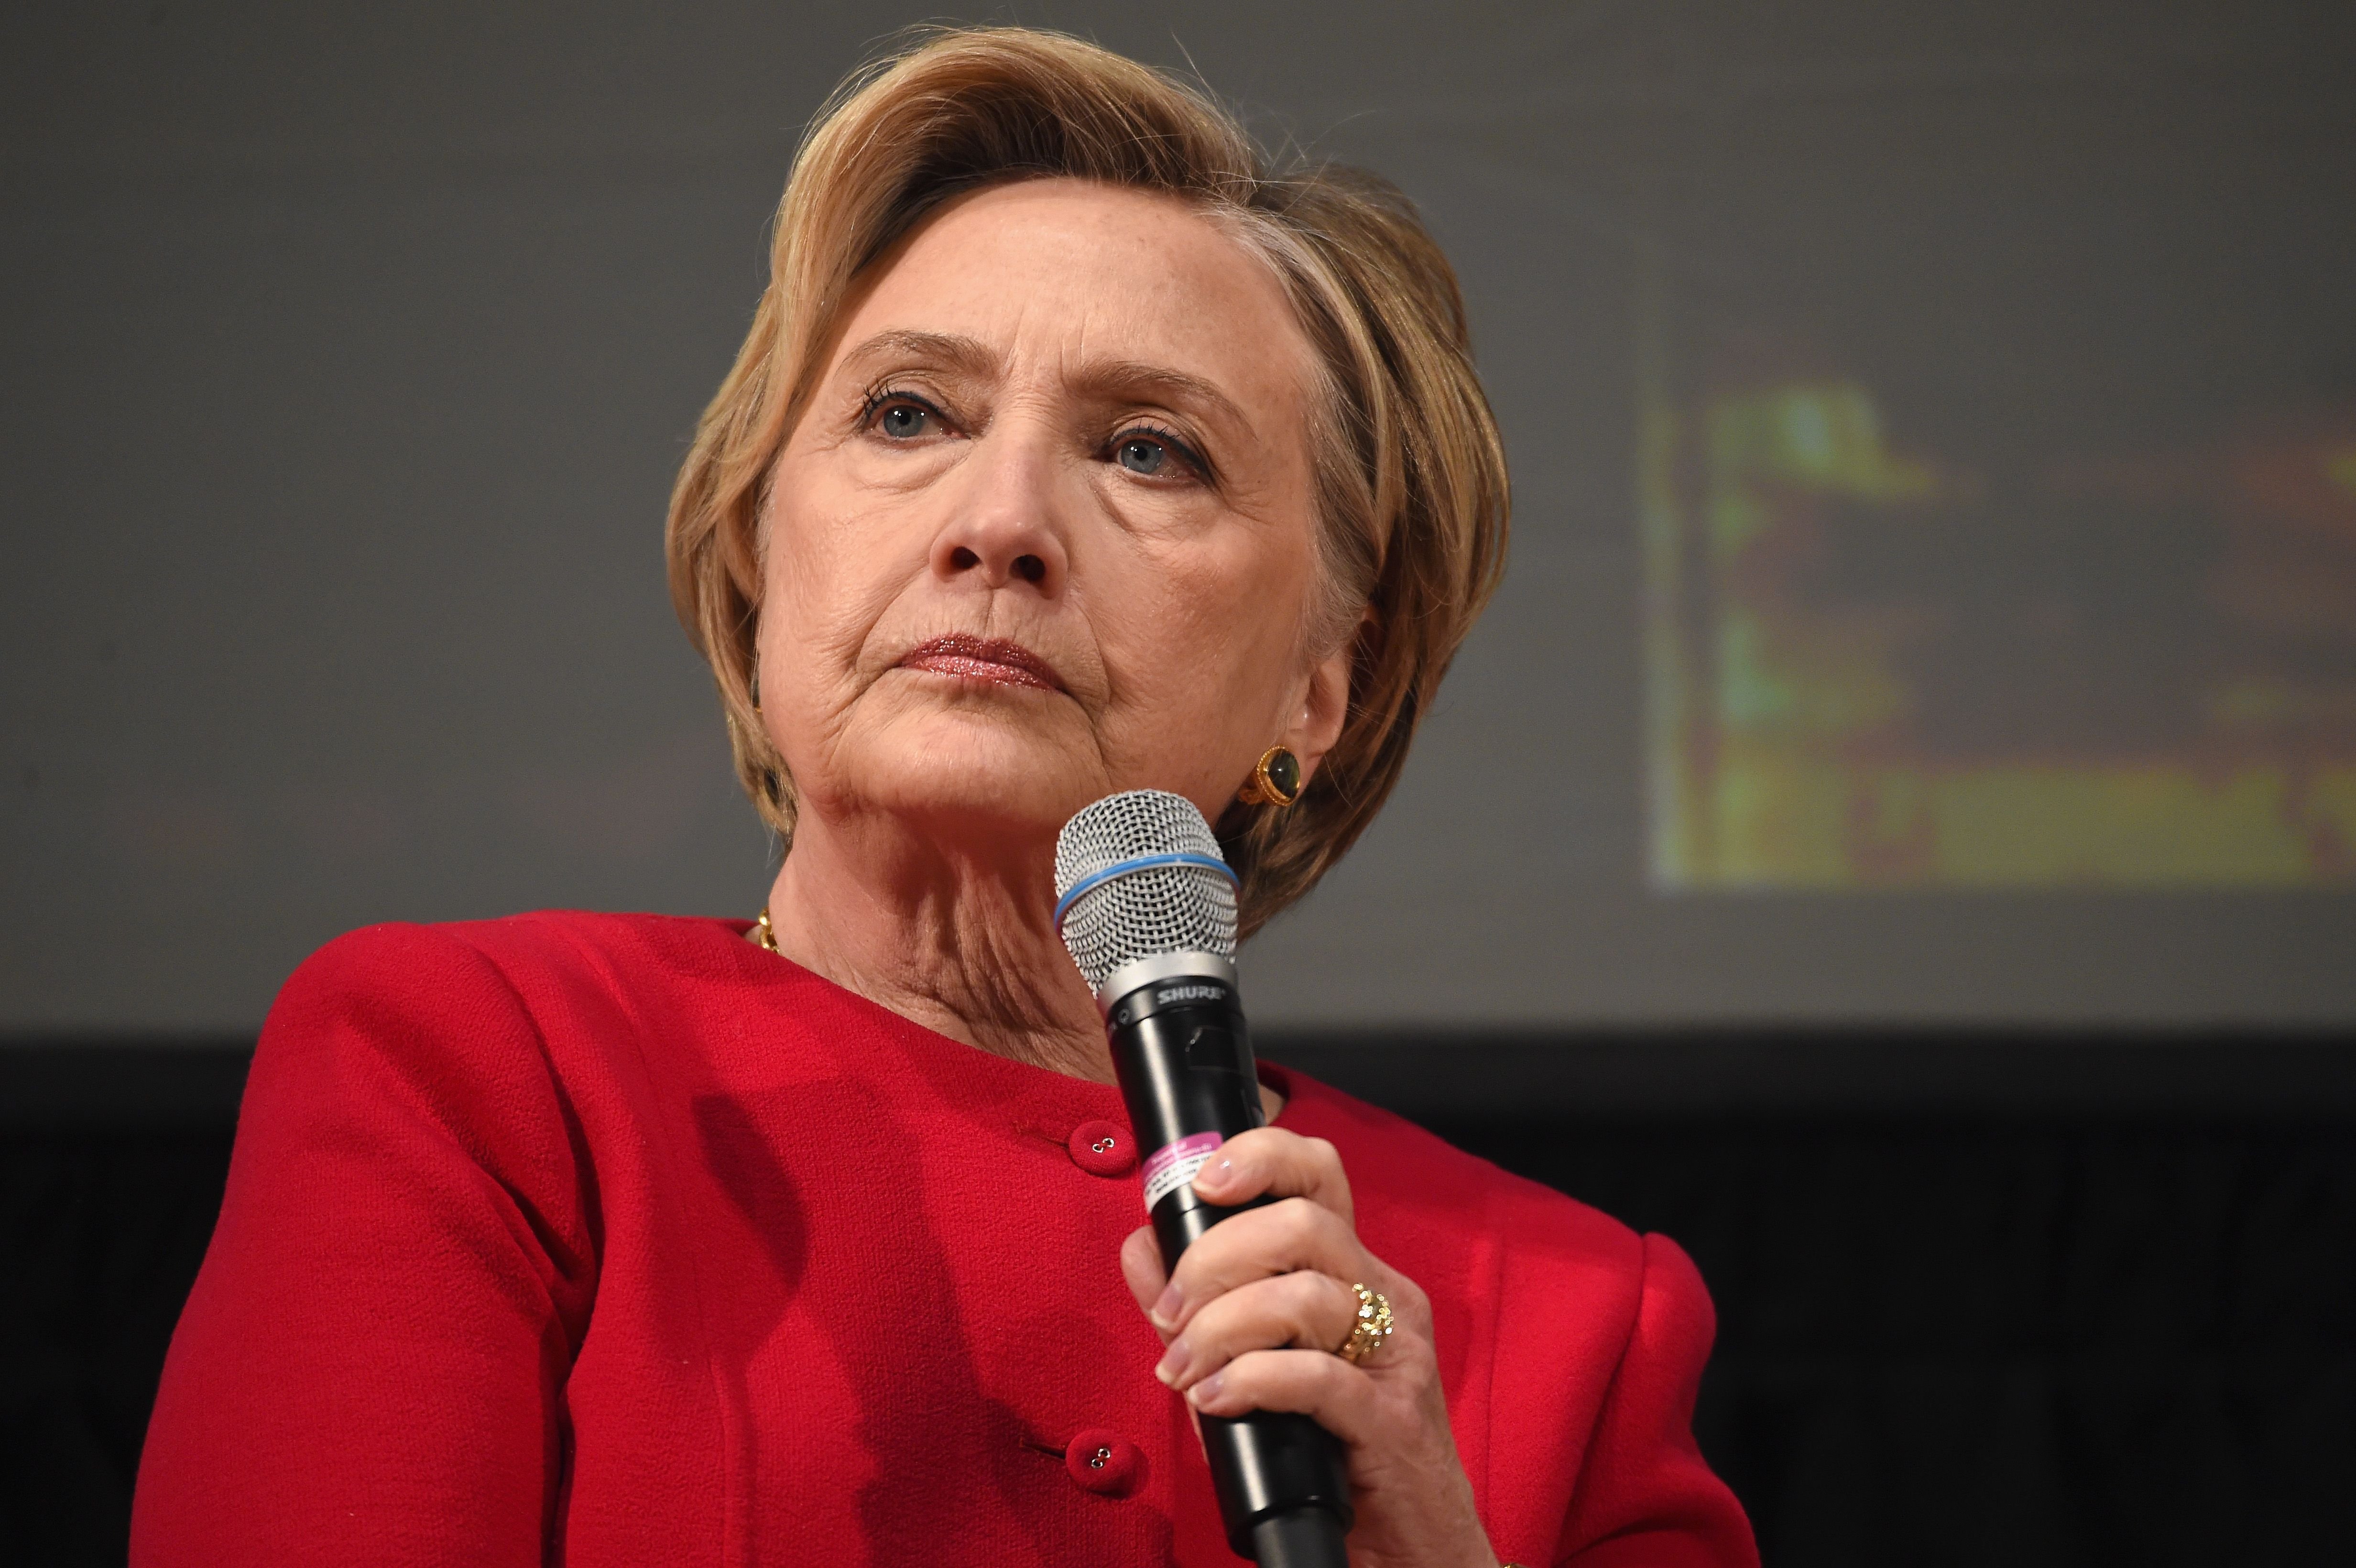 Hillary Clinton during The Streicker Center hosts a Special Evening with Former Secretary of State Hillary Clinton at The Streicker Center in New York City | Photo: Michael Kovac/Getty Images